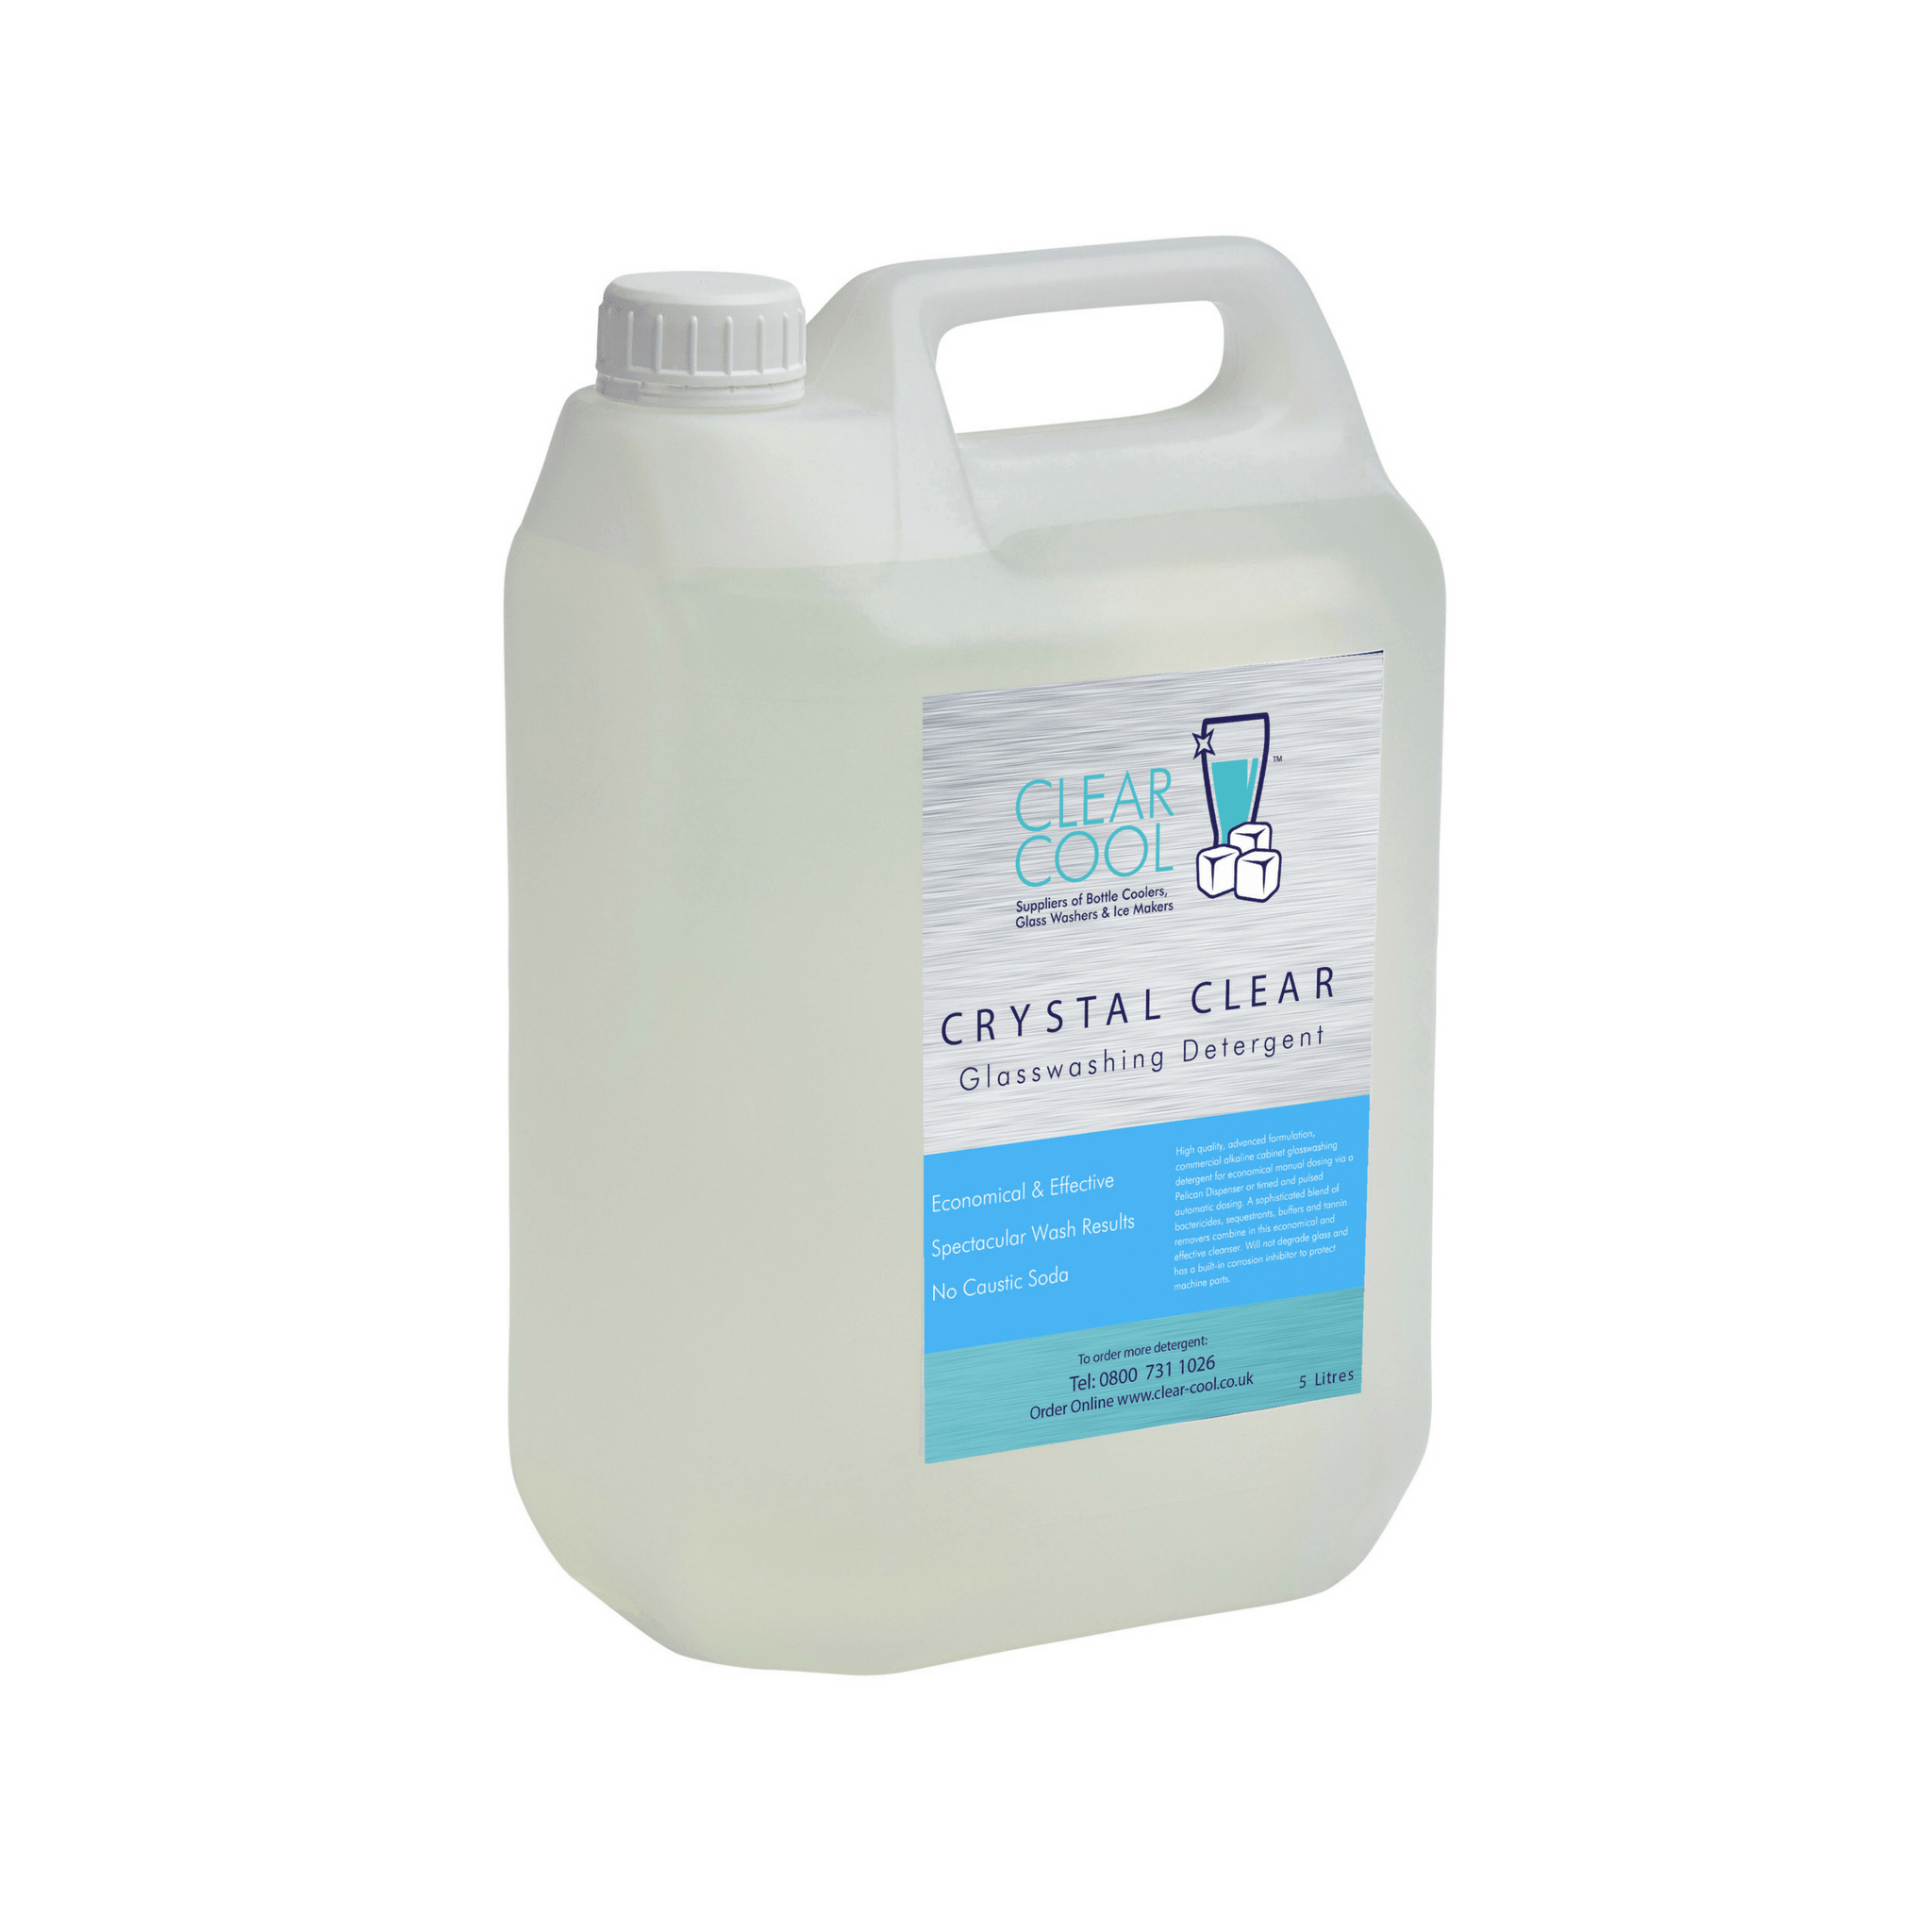 Crystal Clear Glass Washer Detergent - Pack of 4 - Clear Cool